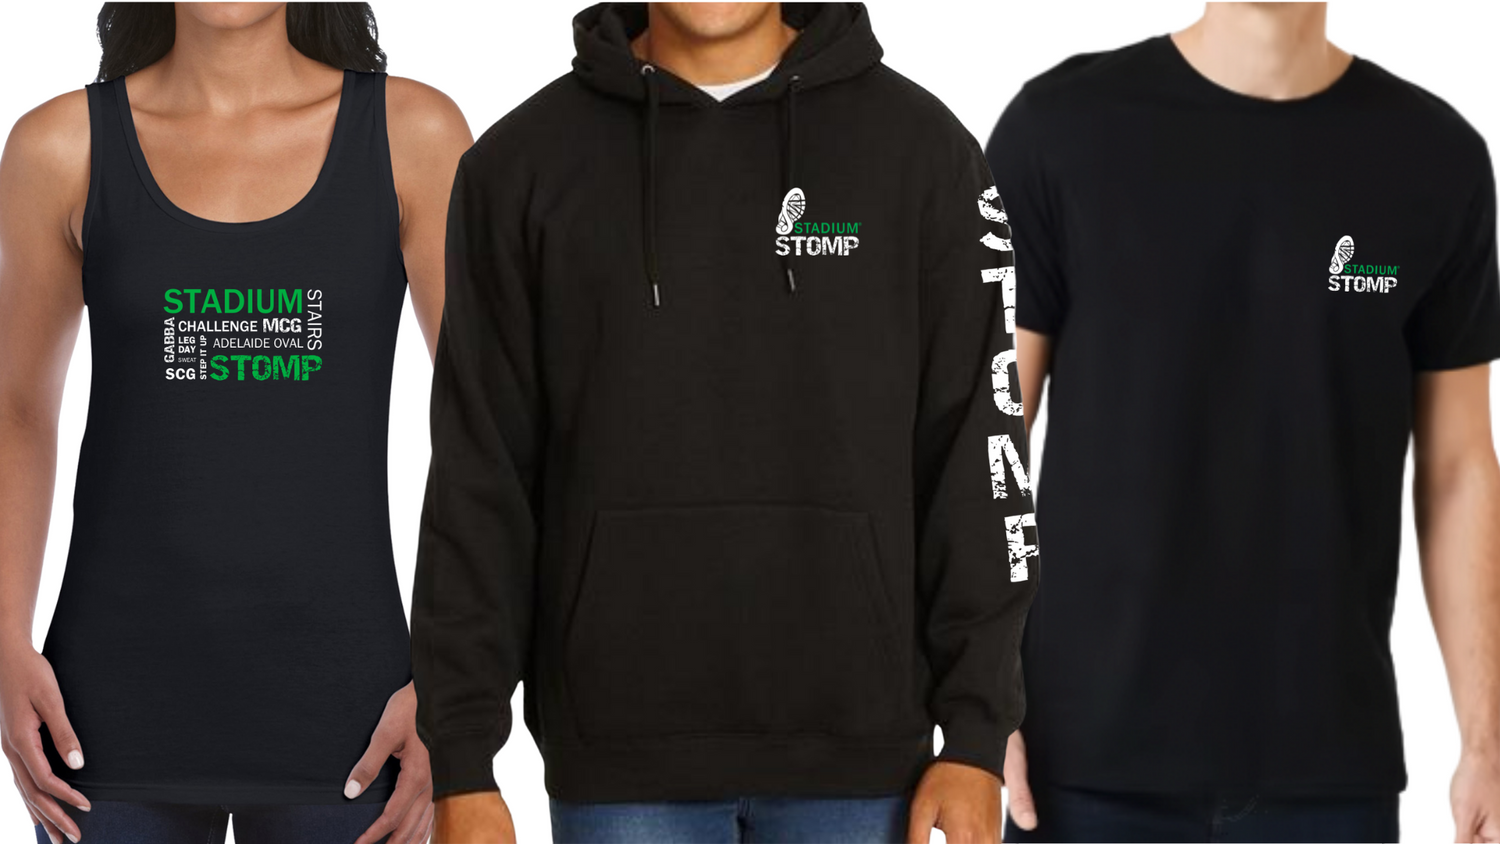 Example Stadium Stomp Merchandise featuring singlet, hoodie and t-shirt